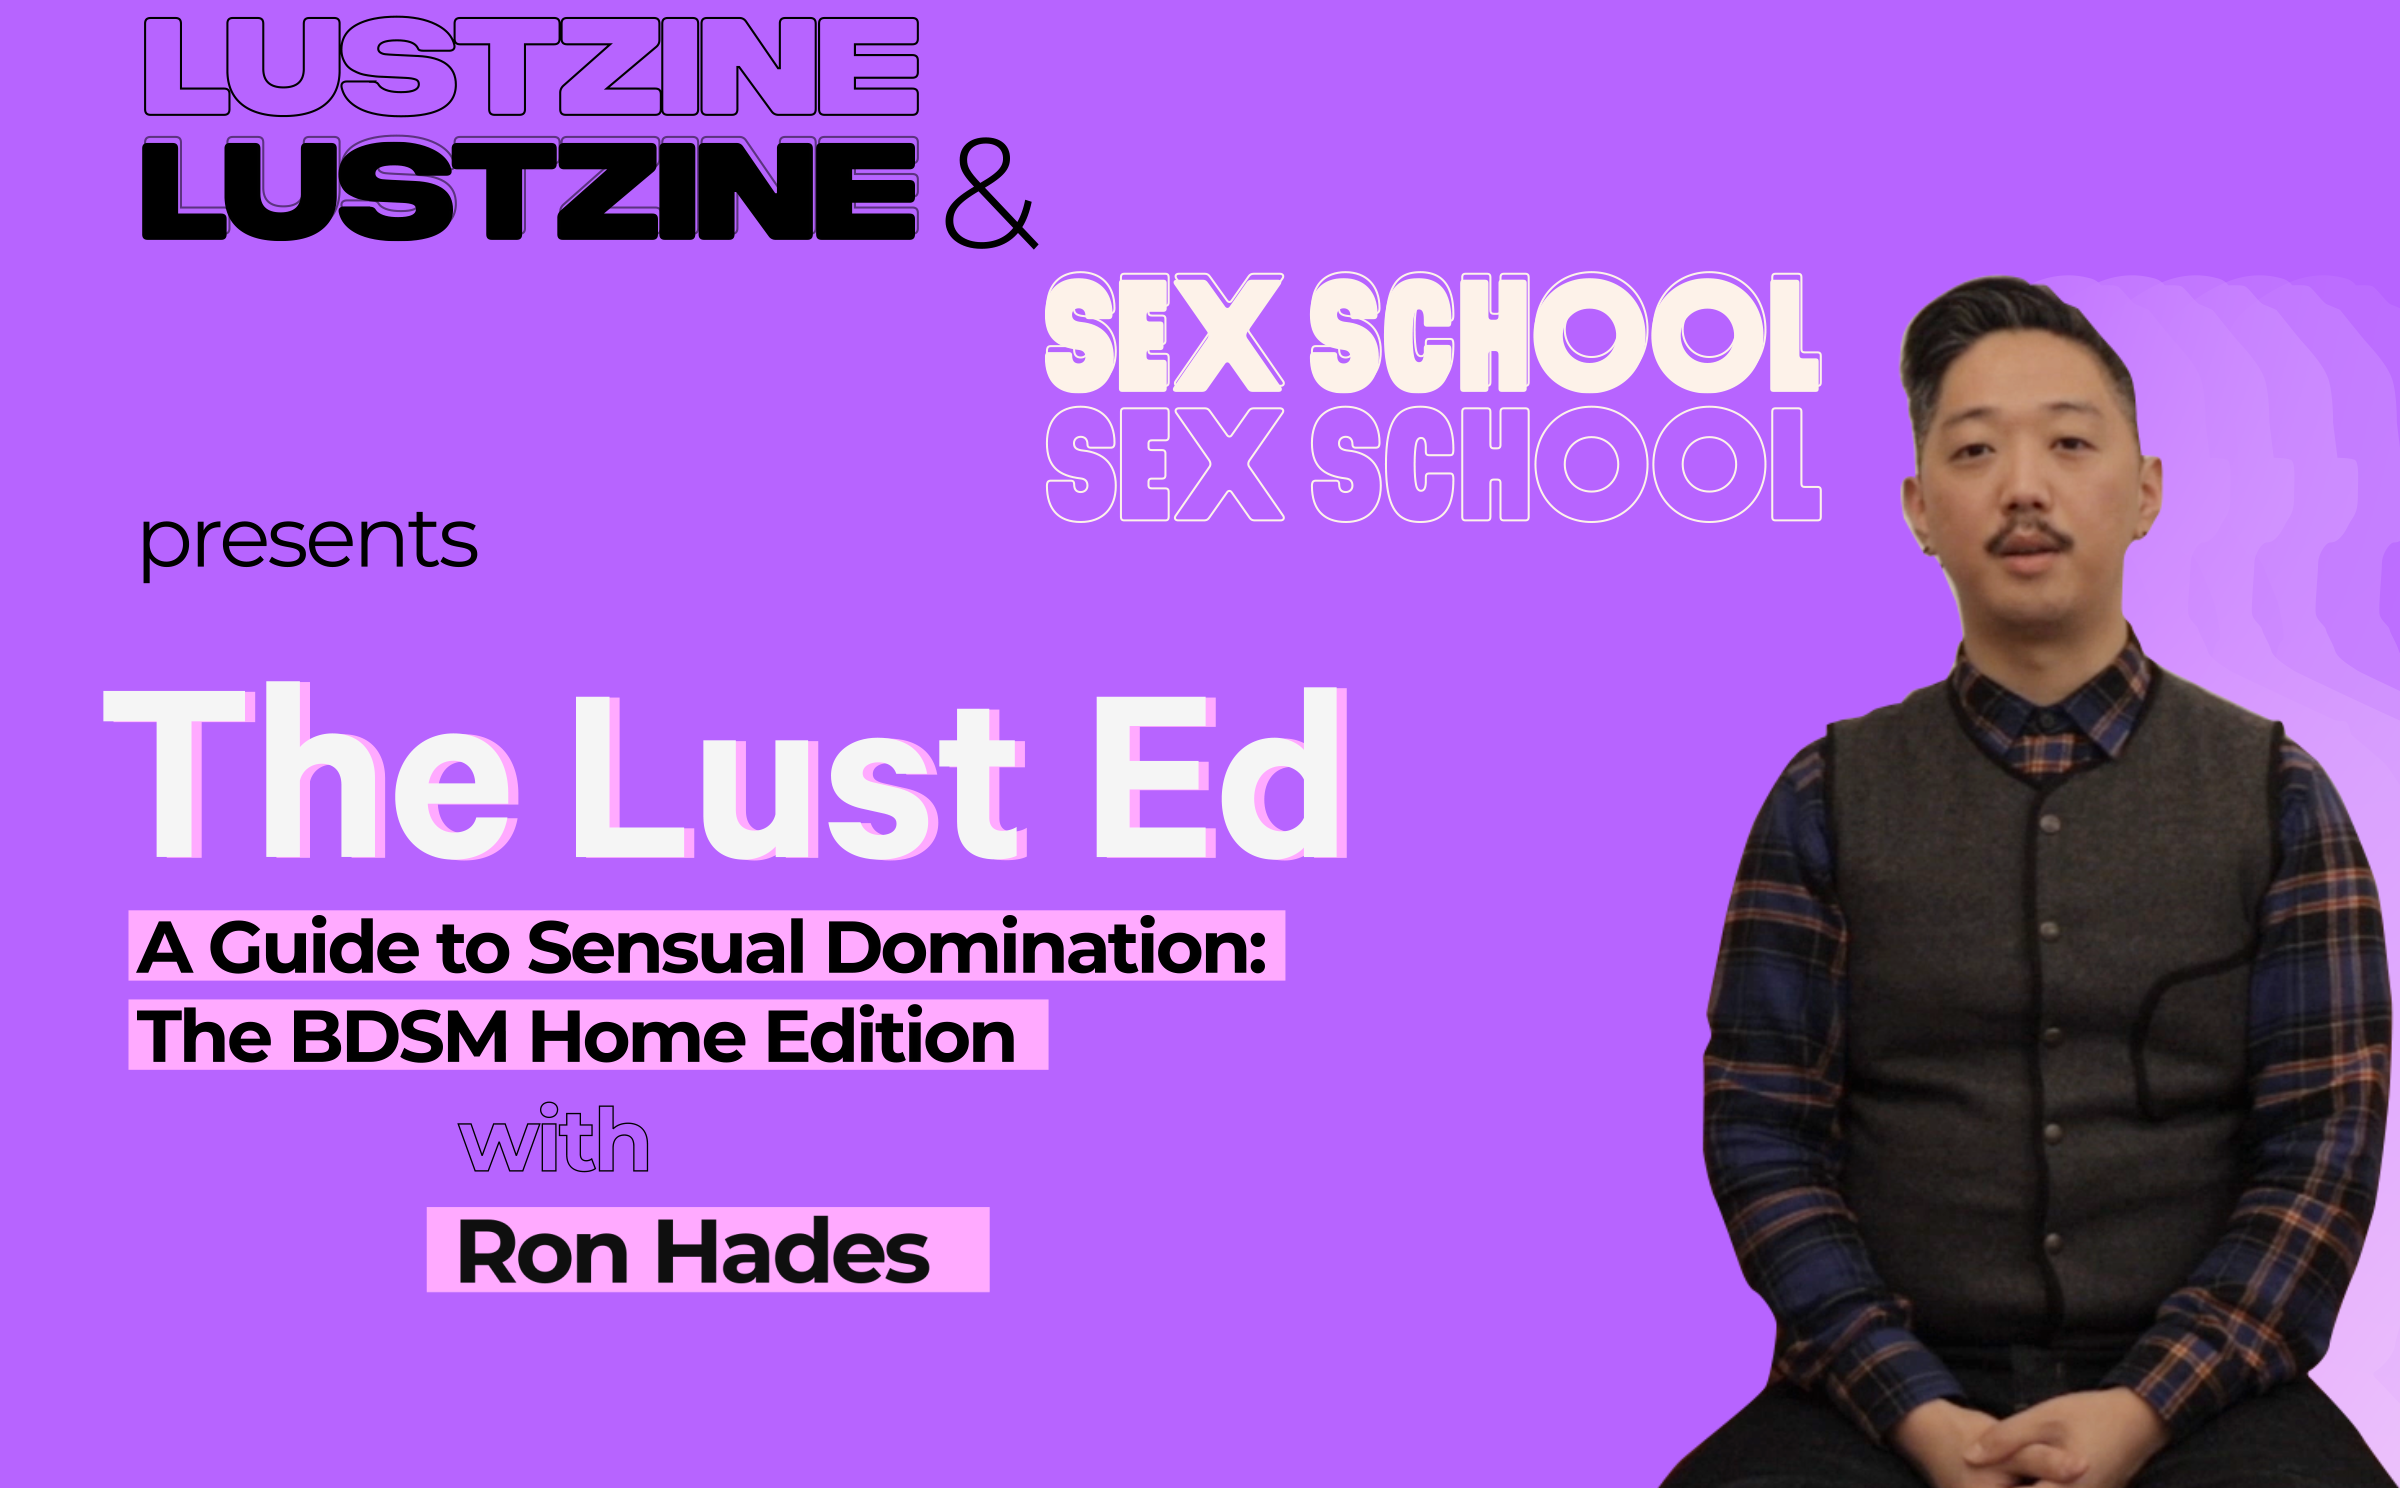 Watch and Learn BDSM on a Budget at Home with Ron Hades